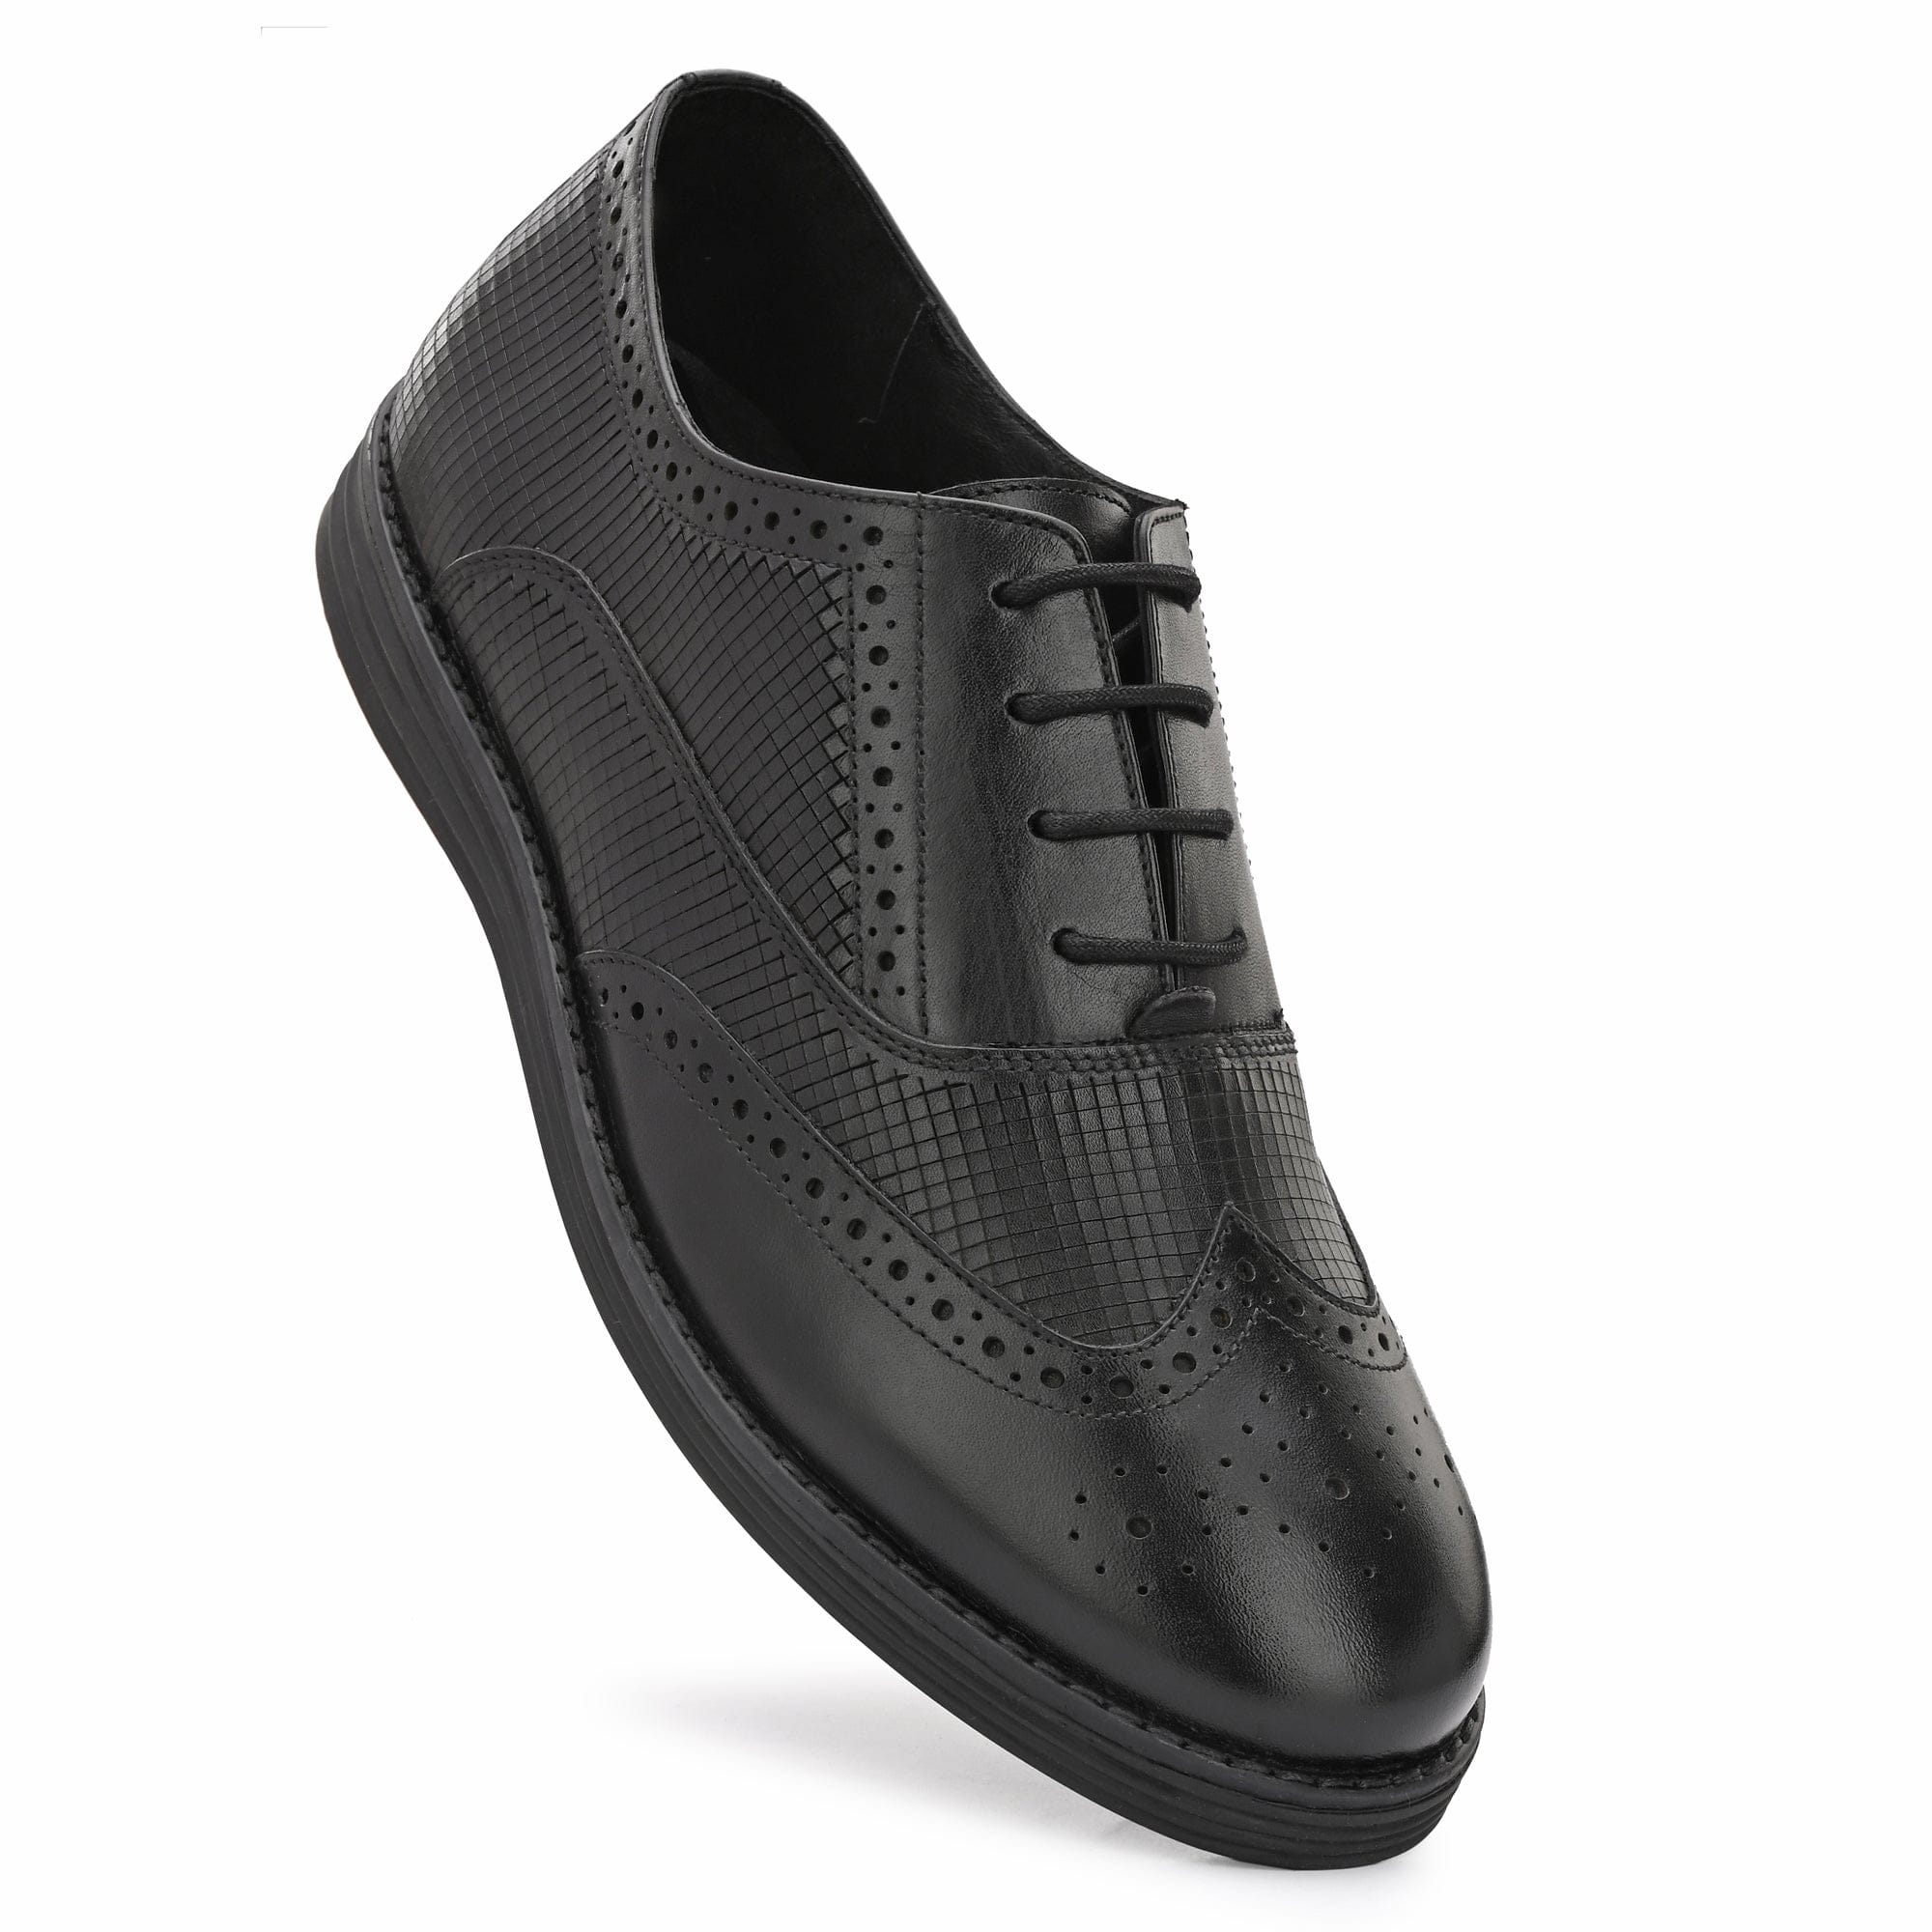 Legwork Lined Laser Brogue Oxford 2.0 Black Italian Leather Shoes